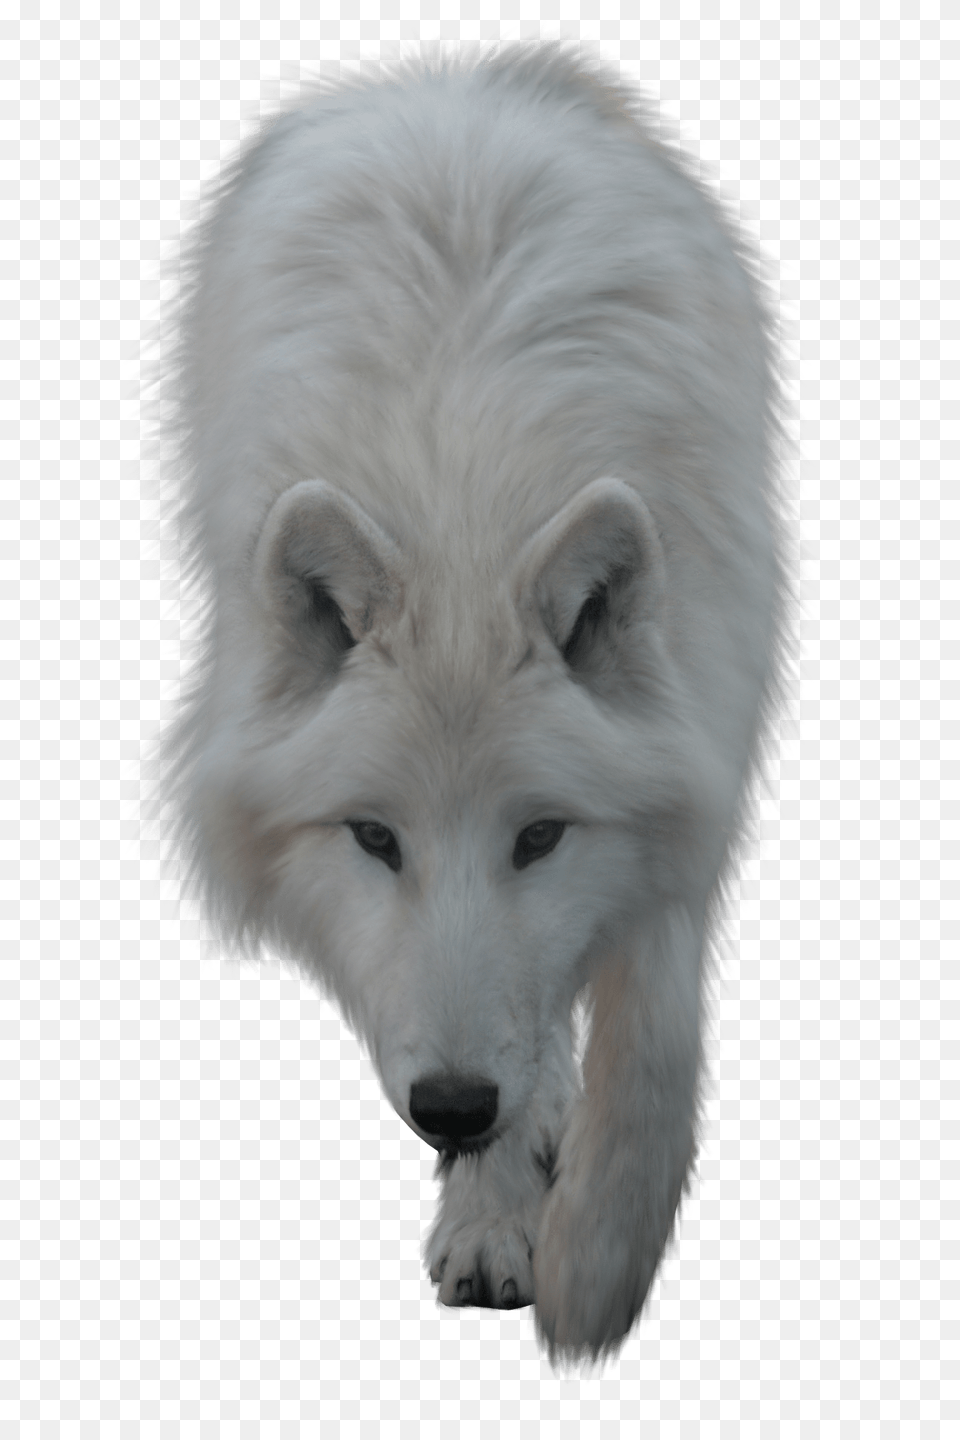 Download Hd Animals Wolves Transparent Wolf Transparent White Wolf Transparent Background, Animal, Canine, Dog, Mammal Png Image